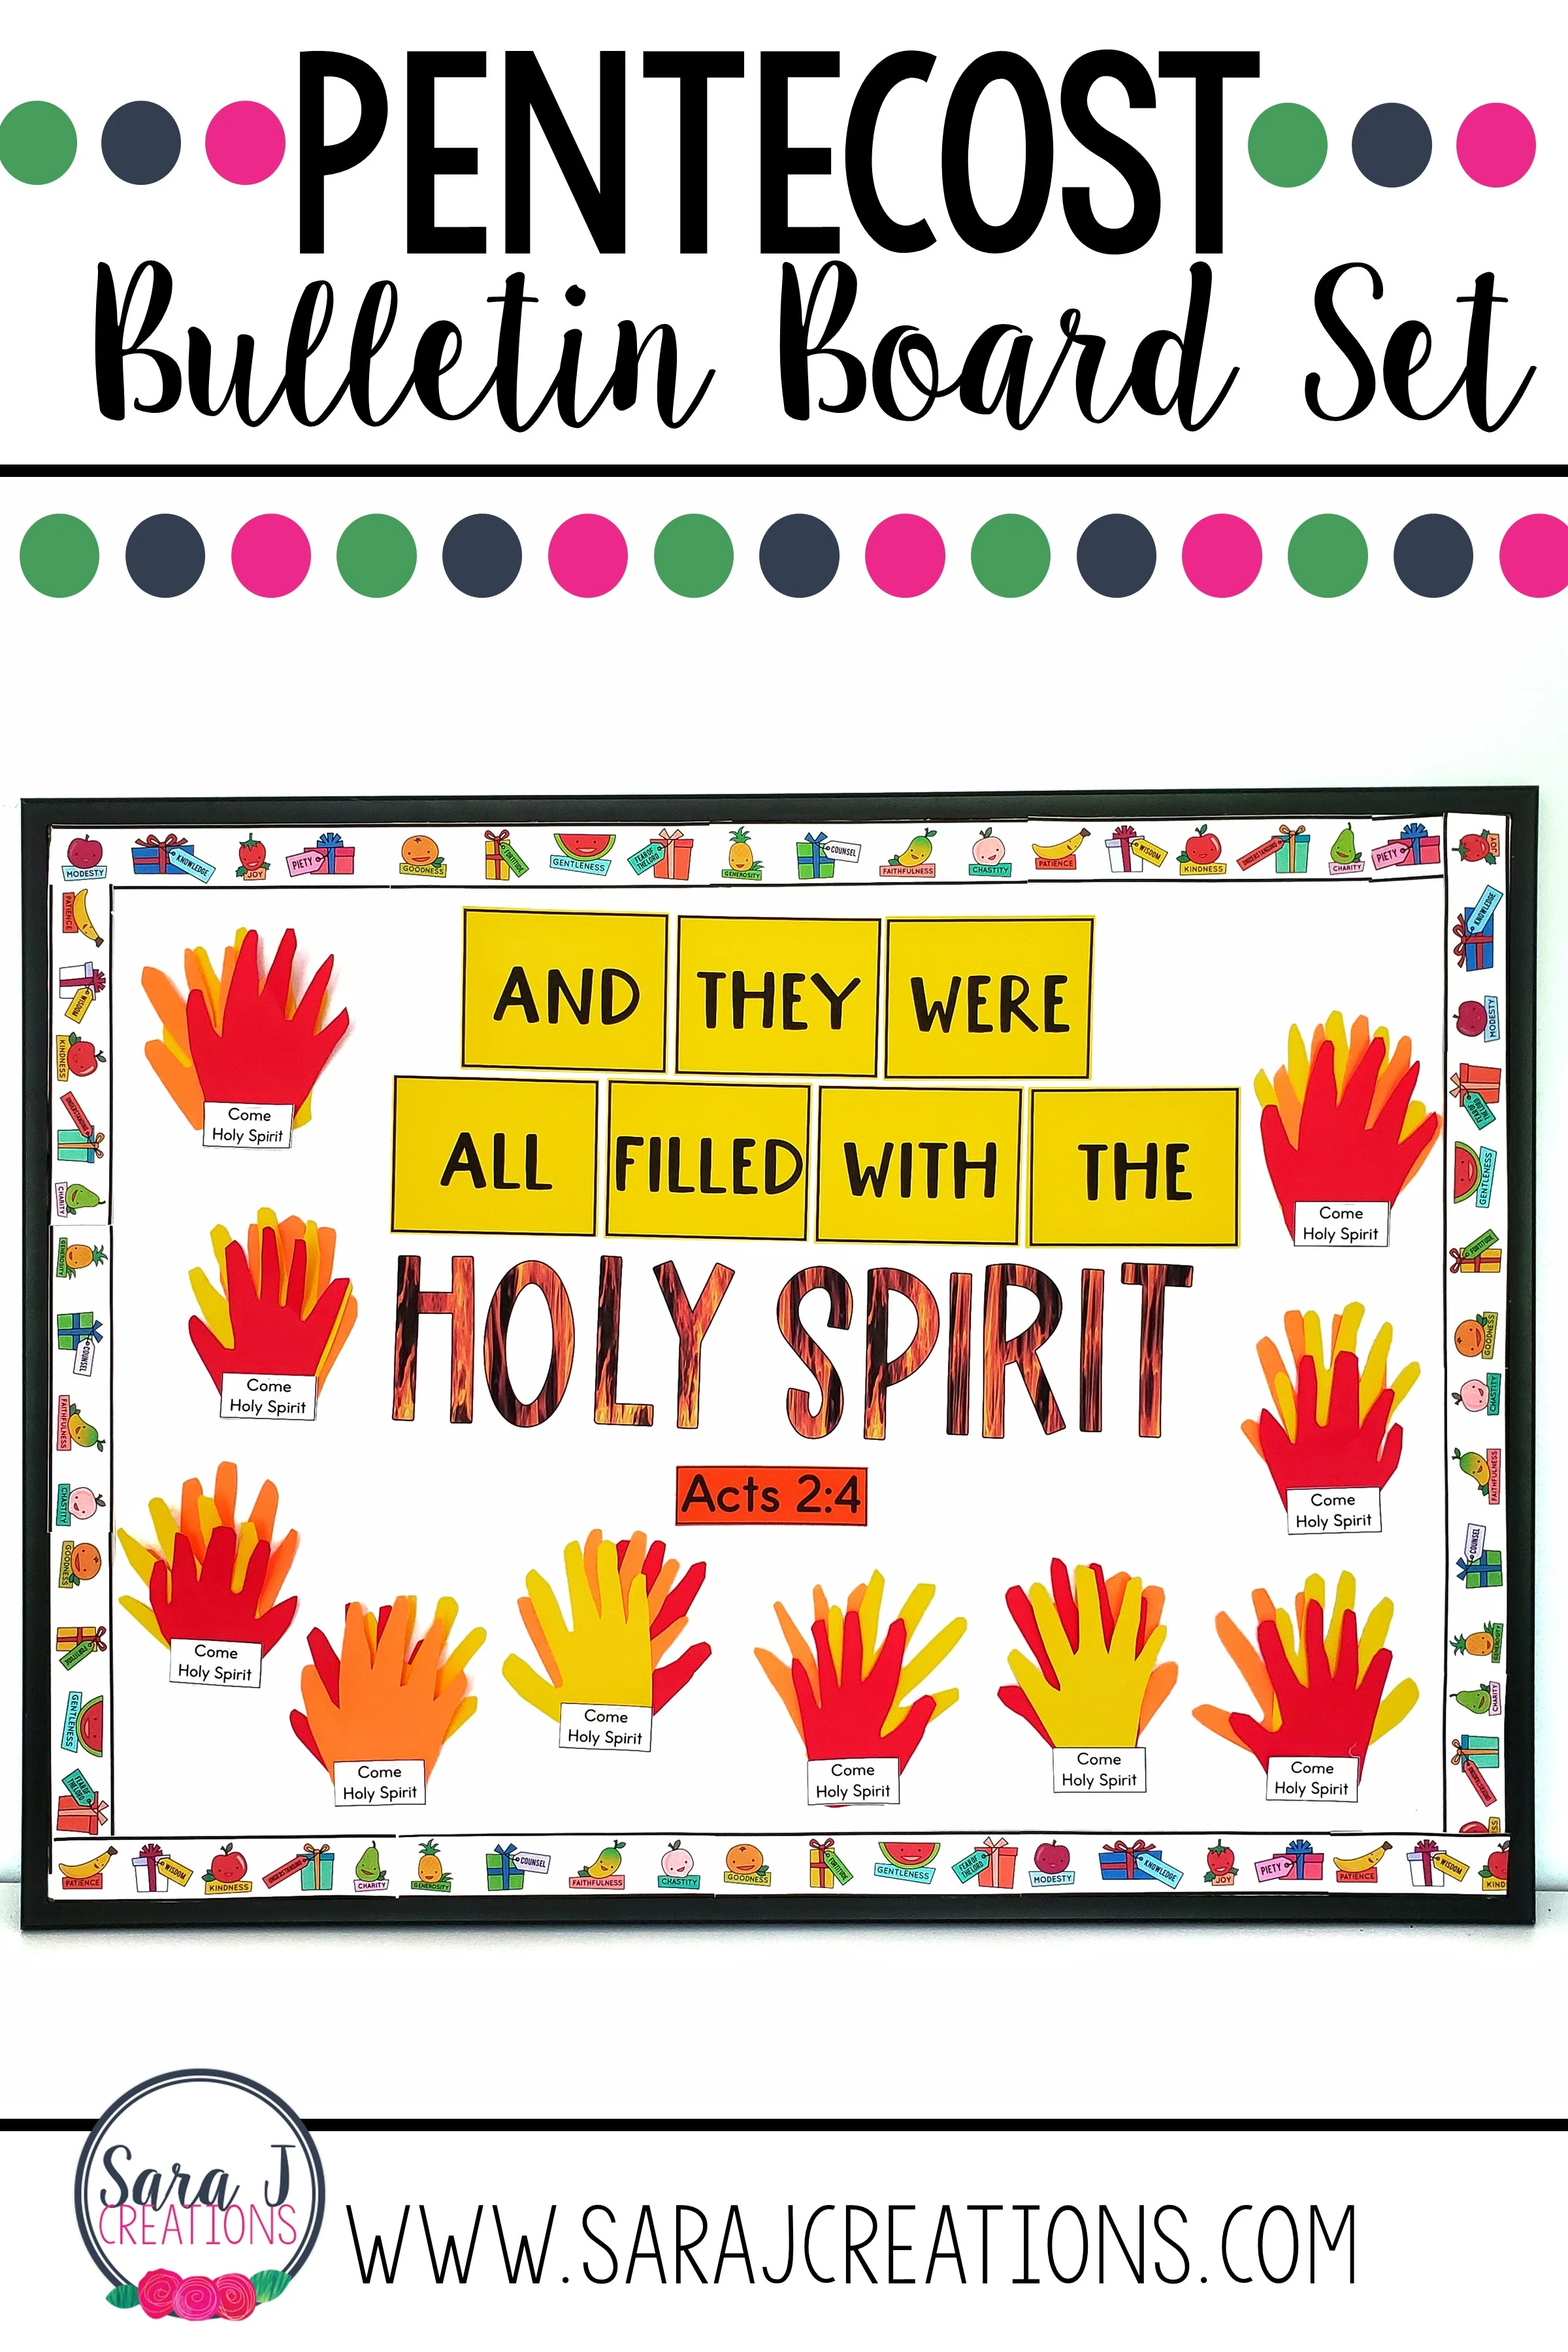 Holy Spirit bulletin board that is perfect for Pentecost or the sacrament of Confirmation!